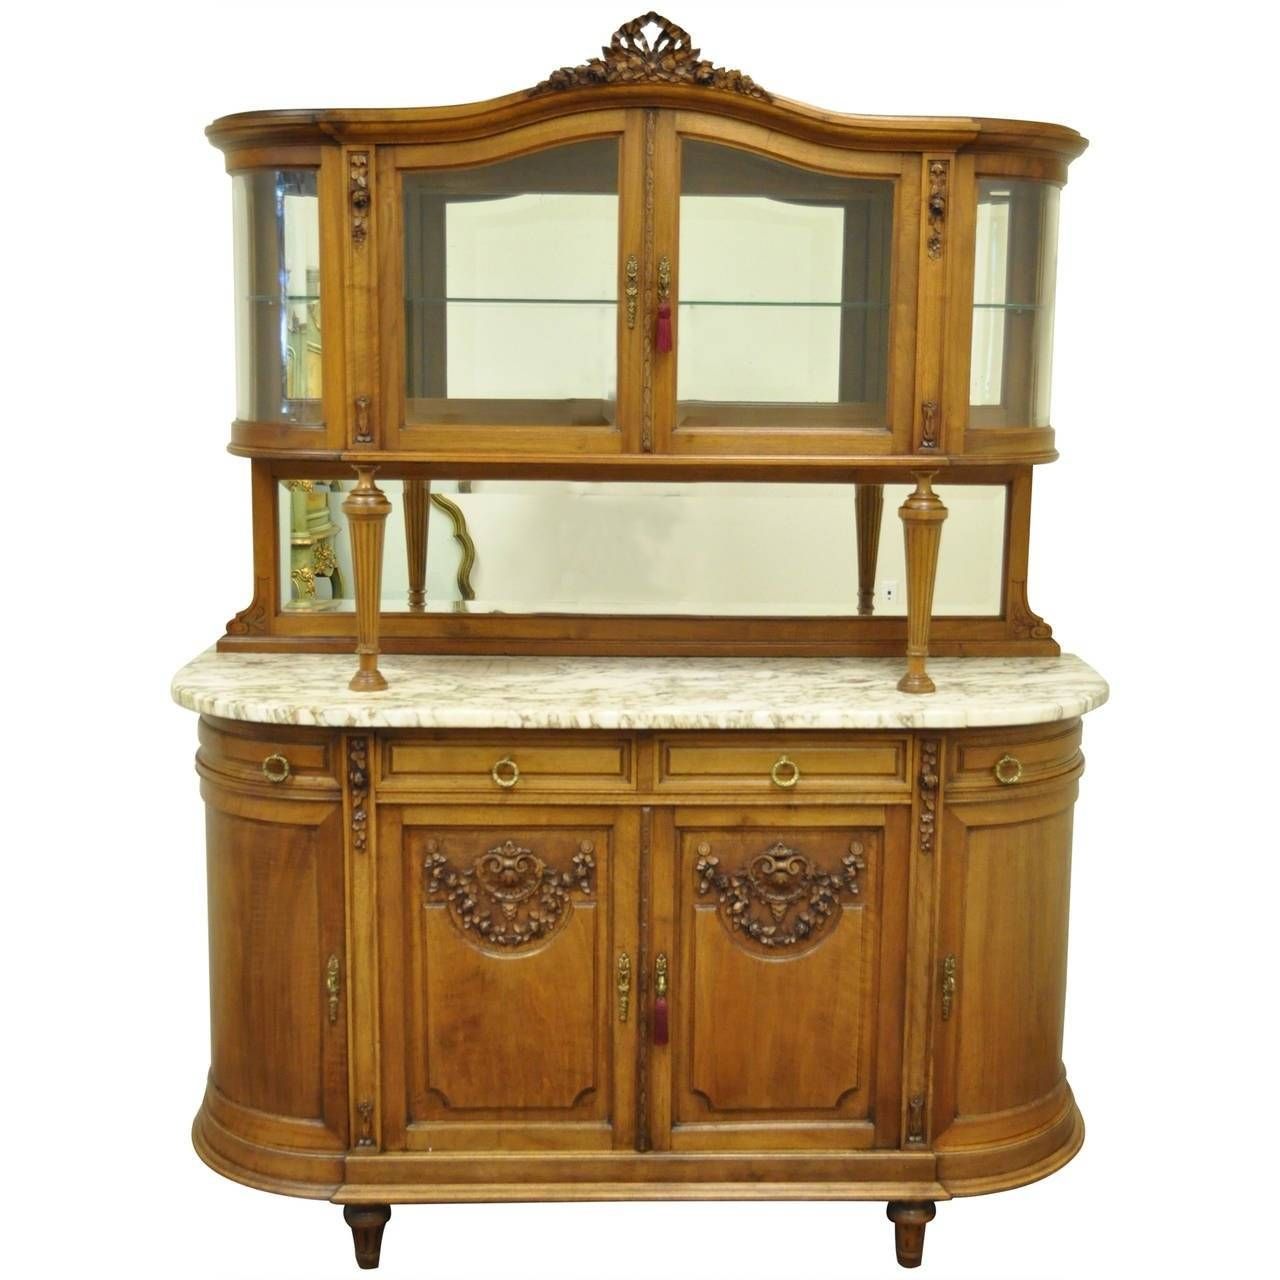 French Louis Xvi Style Marble Top Sideboard Or Curio Cabinet Regarding French Sideboard Cabinets (View 2 of 15)